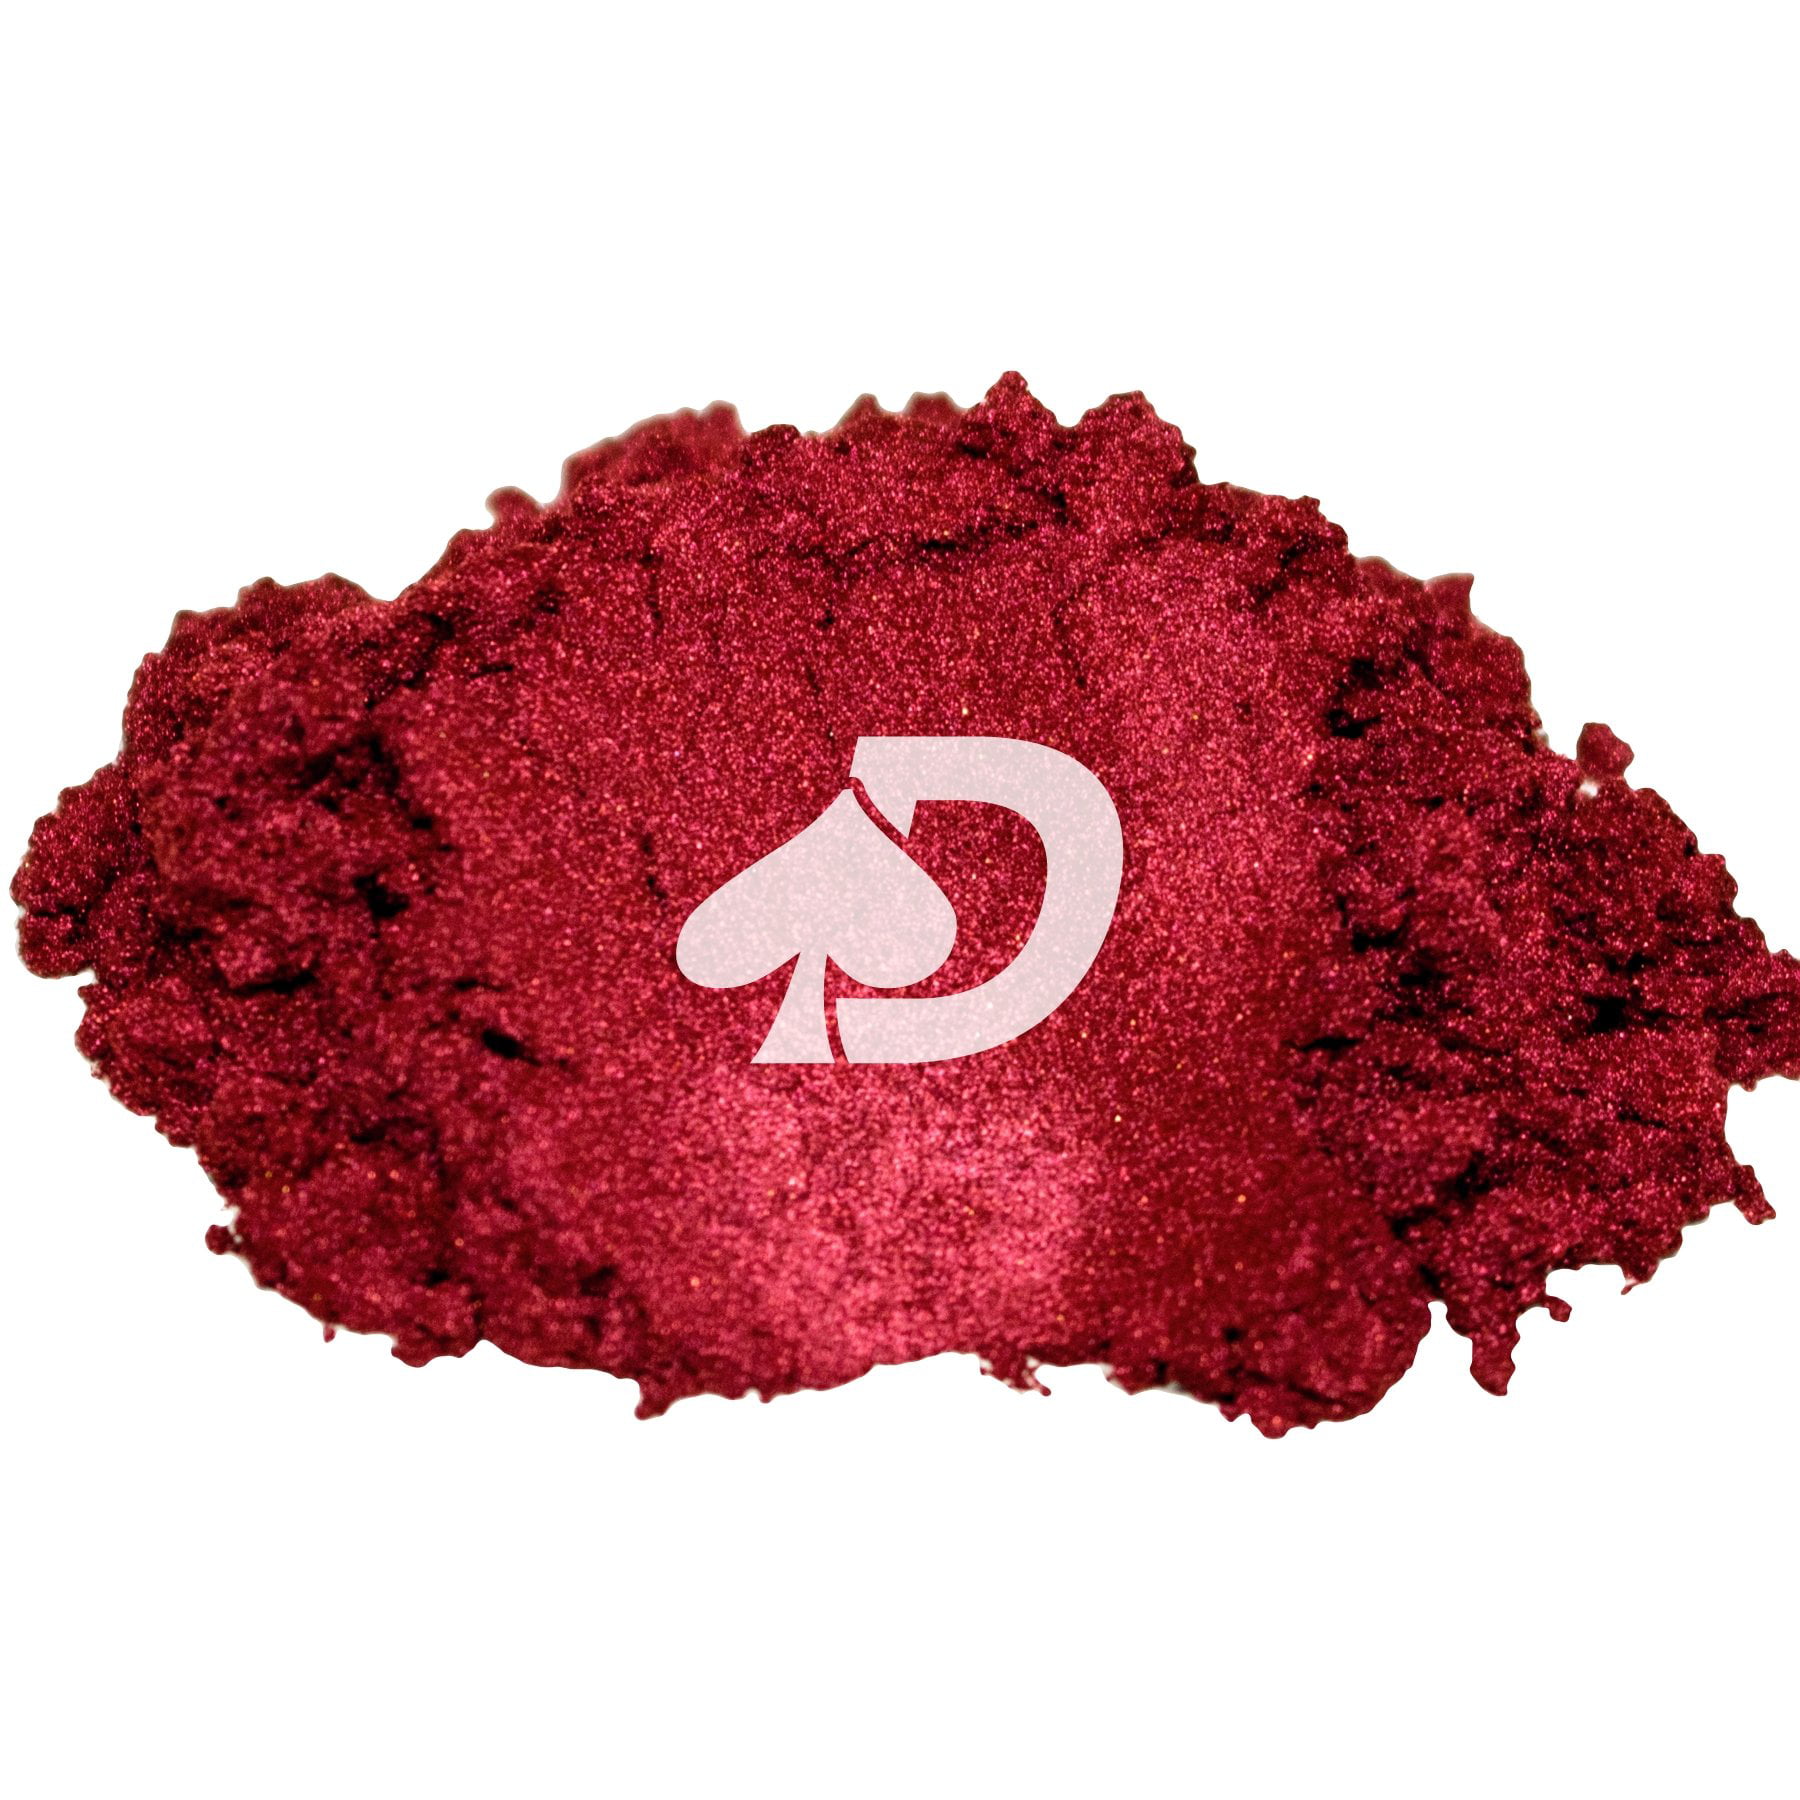 Cranberry Crush Pearl - Red Metallic Car Paint Solid Color Mica